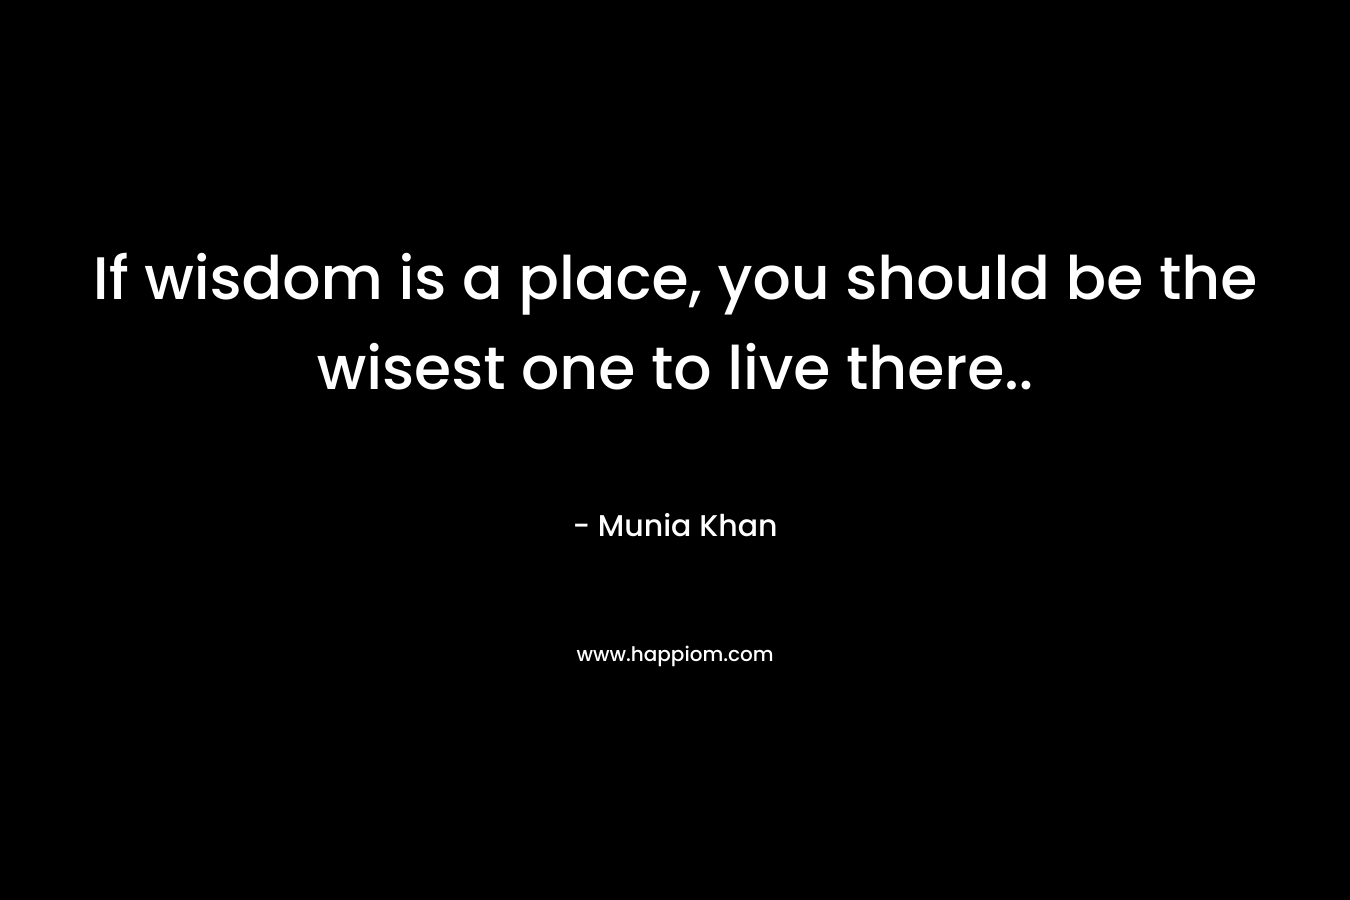 If wisdom is a place, you should be the wisest one to live there..